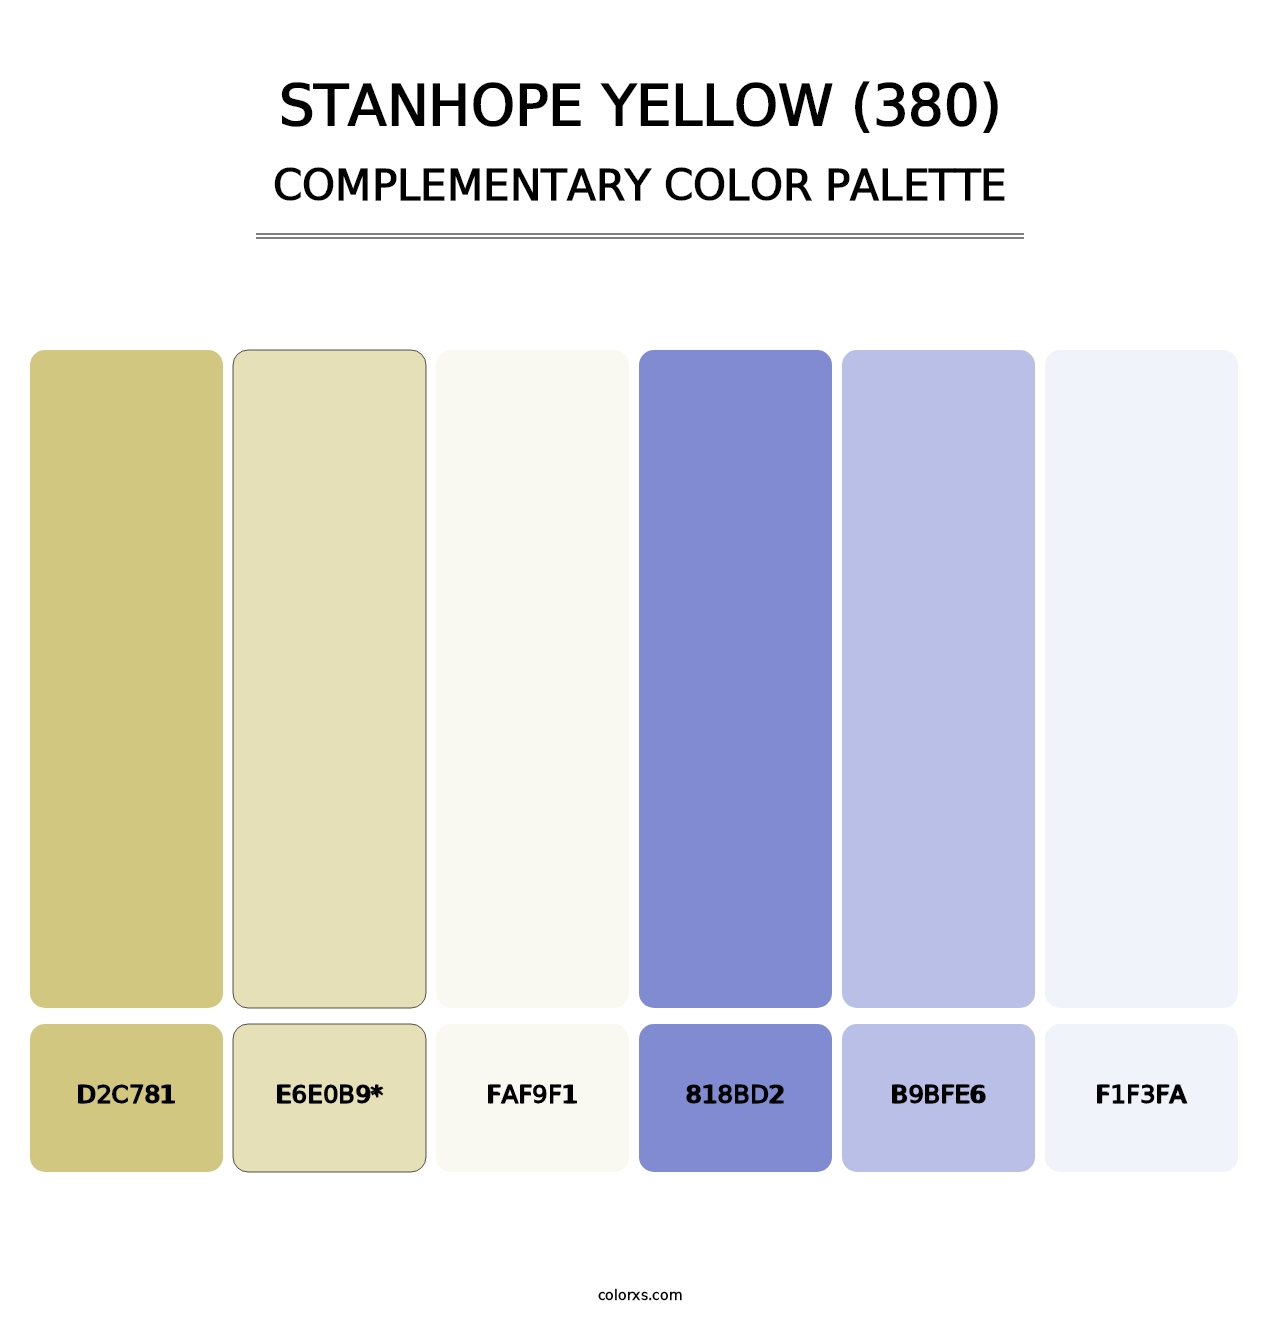 Stanhope Yellow (380) - Complementary Color Palette